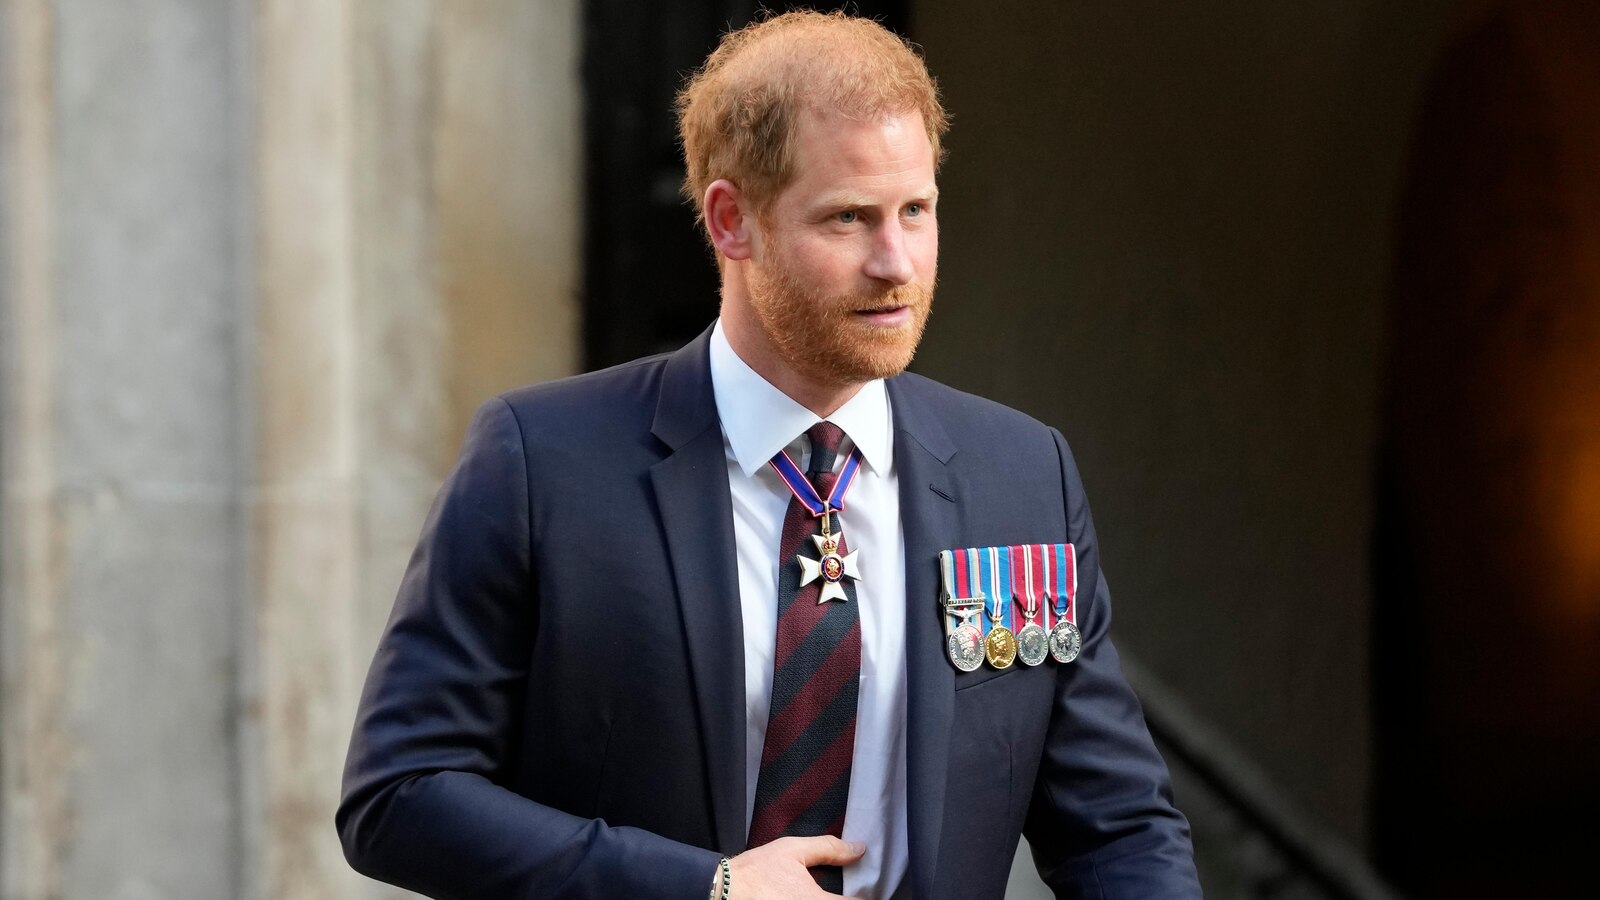 Prince Harry will be given the right to appeal against the rejection of government-funded security details in Britain